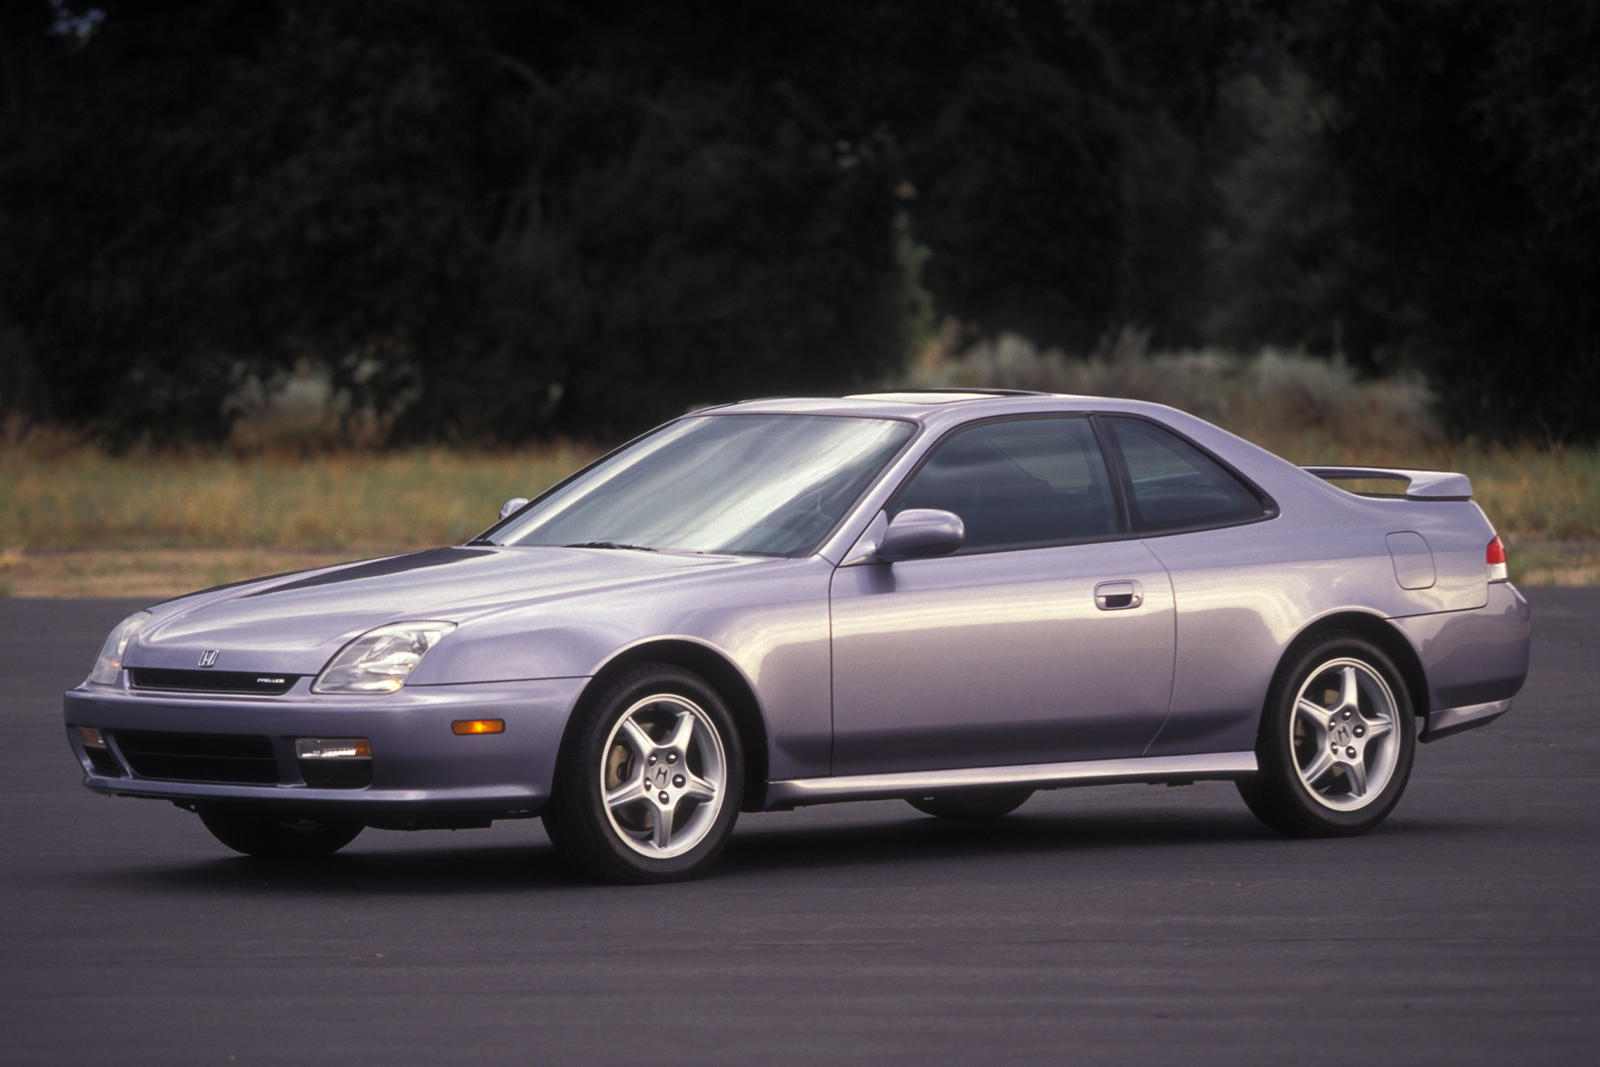 Used Honda Prelude Silver For Sale Near Me Check Photos And Prices